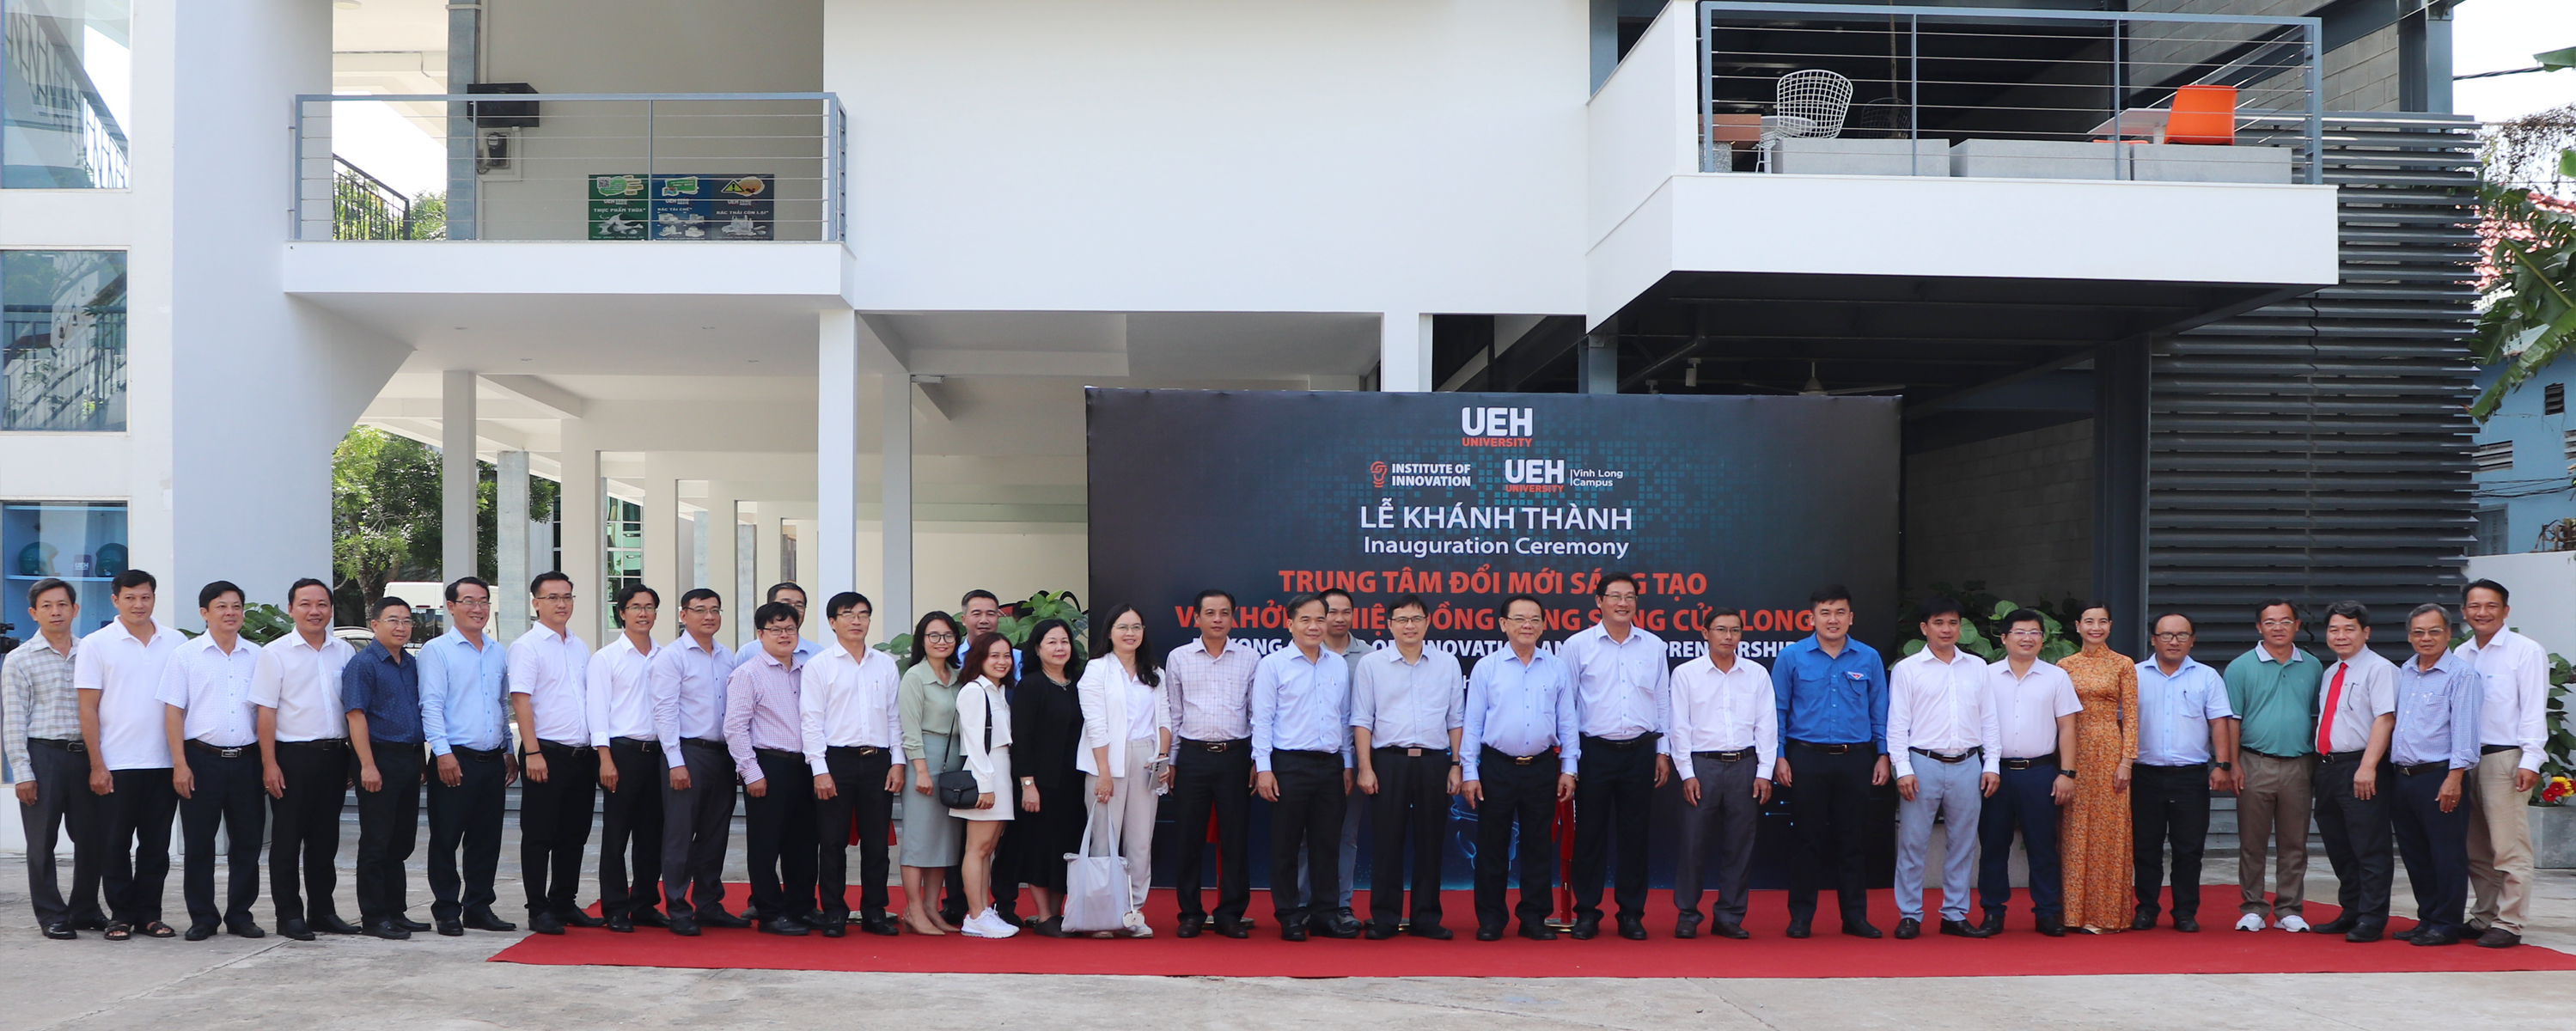 UEH Inaugurating the Mekong Delta Center for Innovation and Entrepreneurship (MCIE) and organizing the contests "THE STEM UEH MEKONG 2024" and "DRONE CHAMPION VINH LONG 2024"